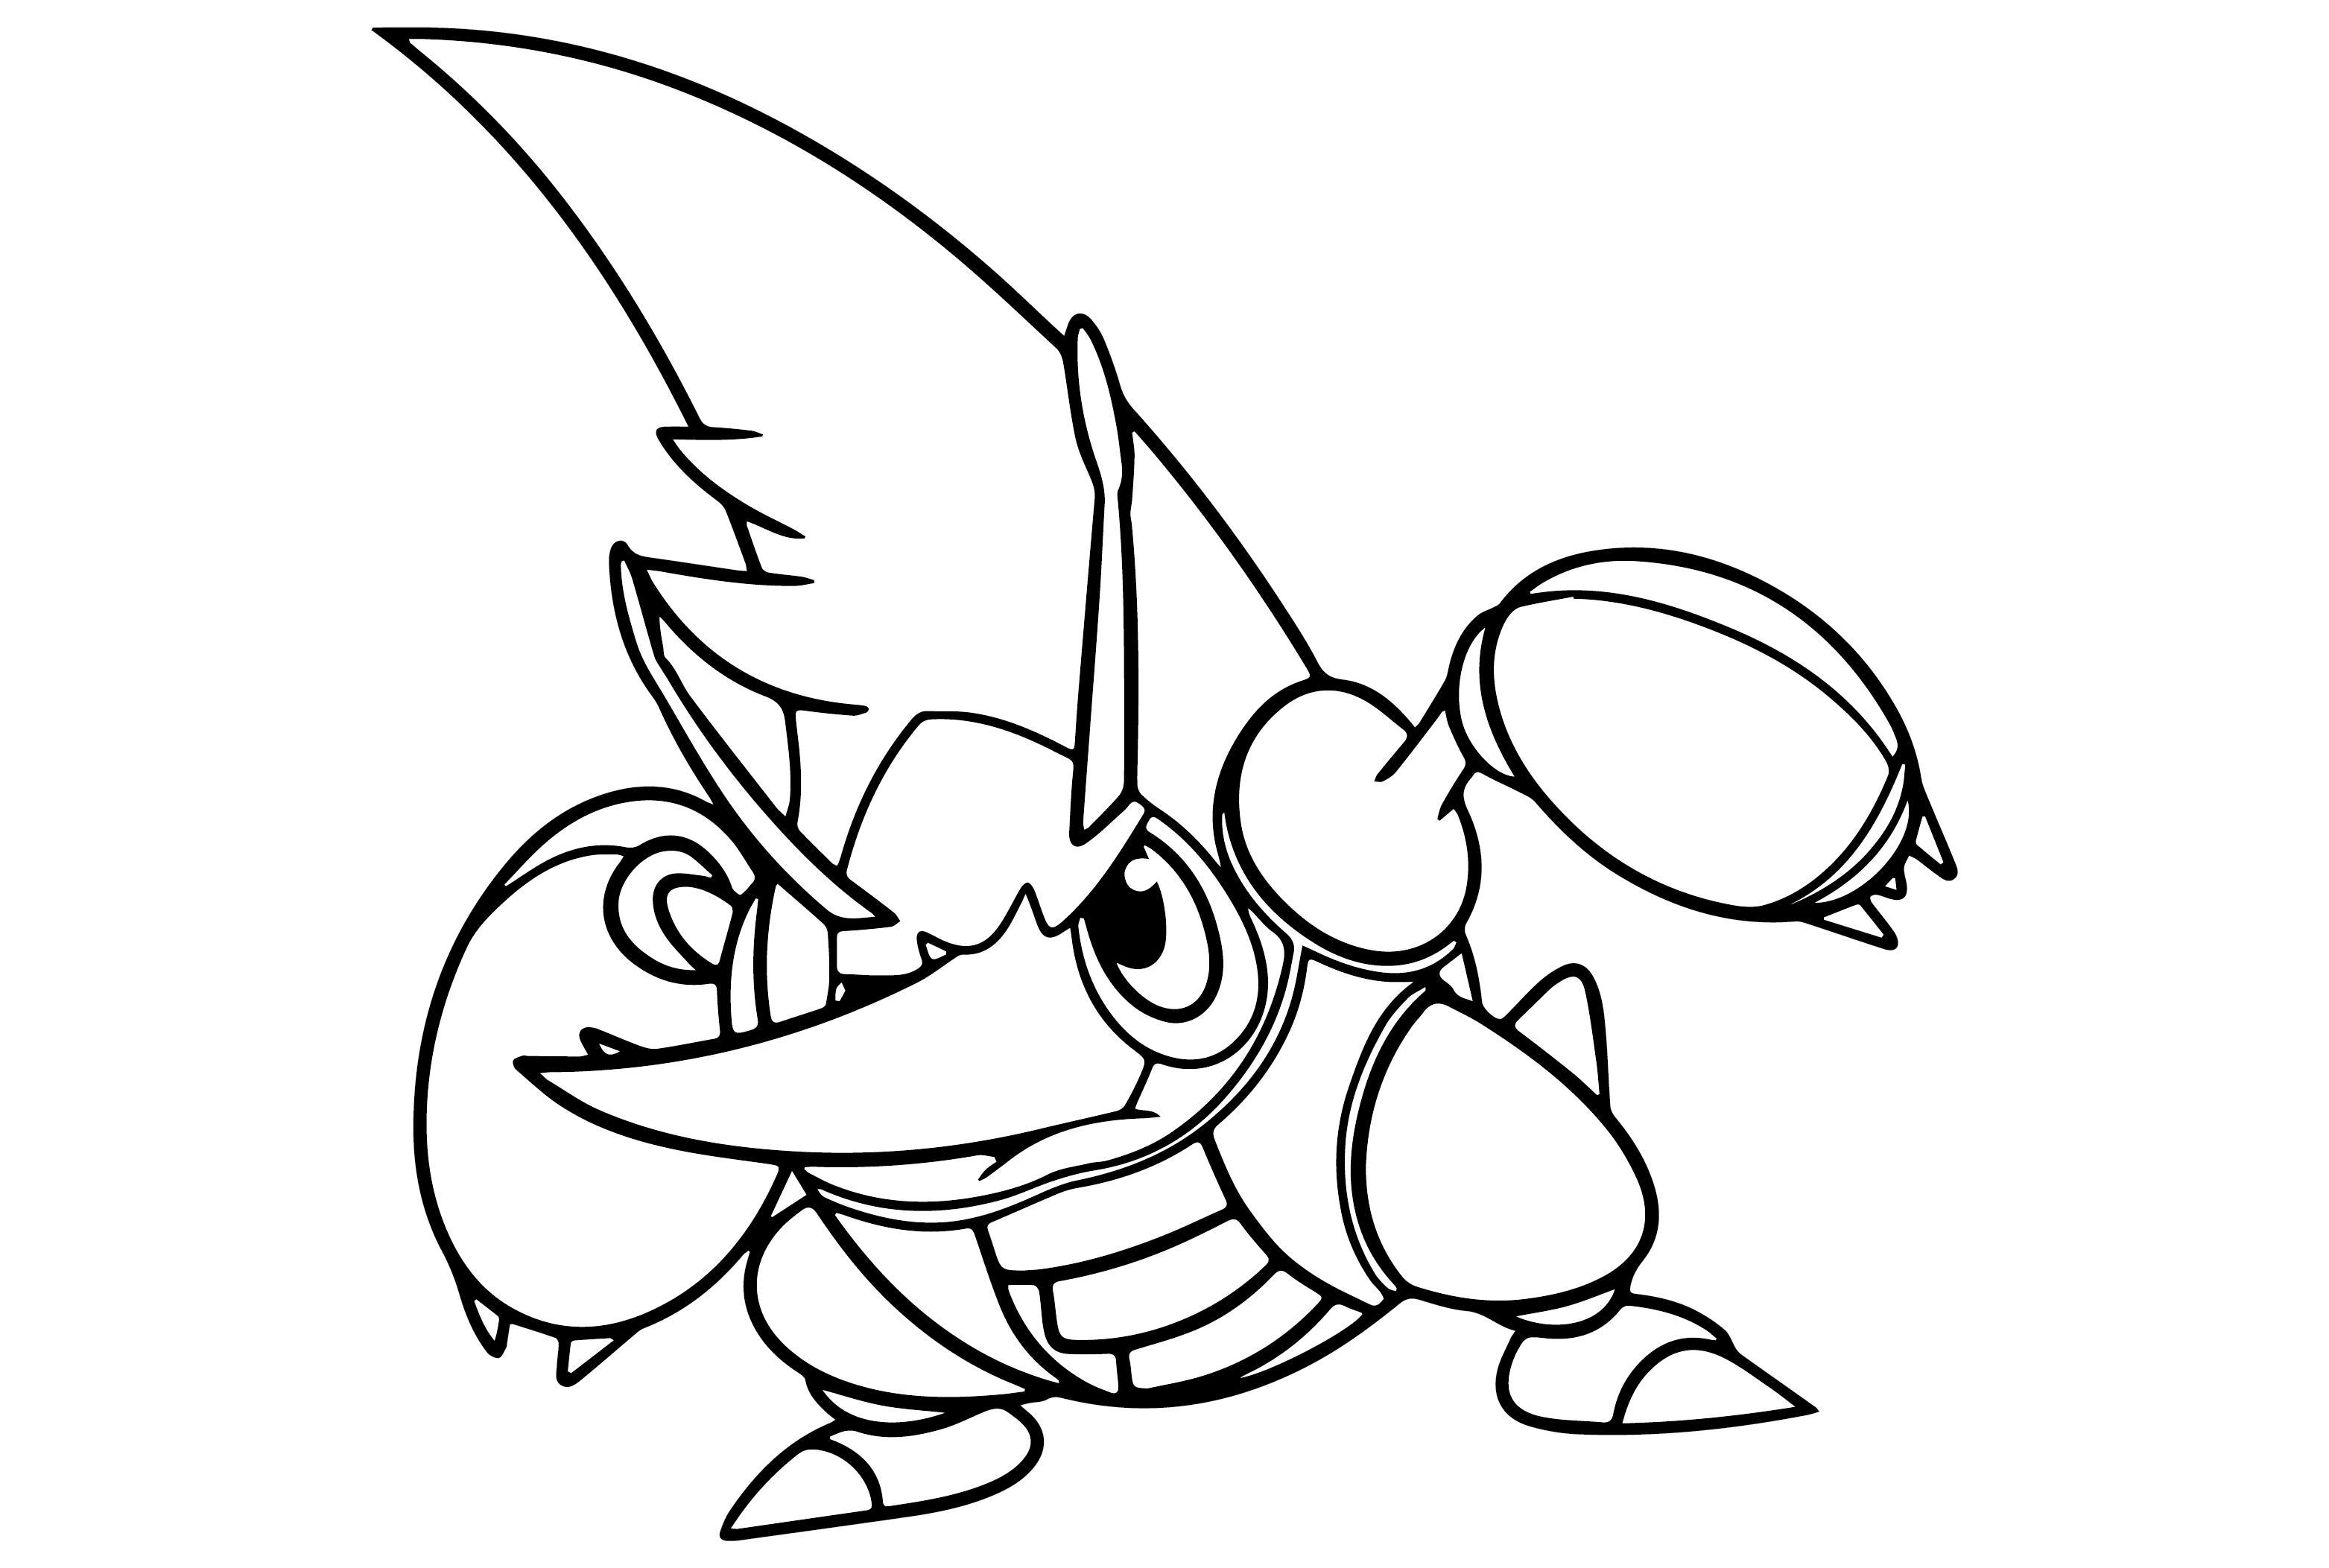 Heracros Mage Pokemon Images to Color - Free Printable Coloring Pages